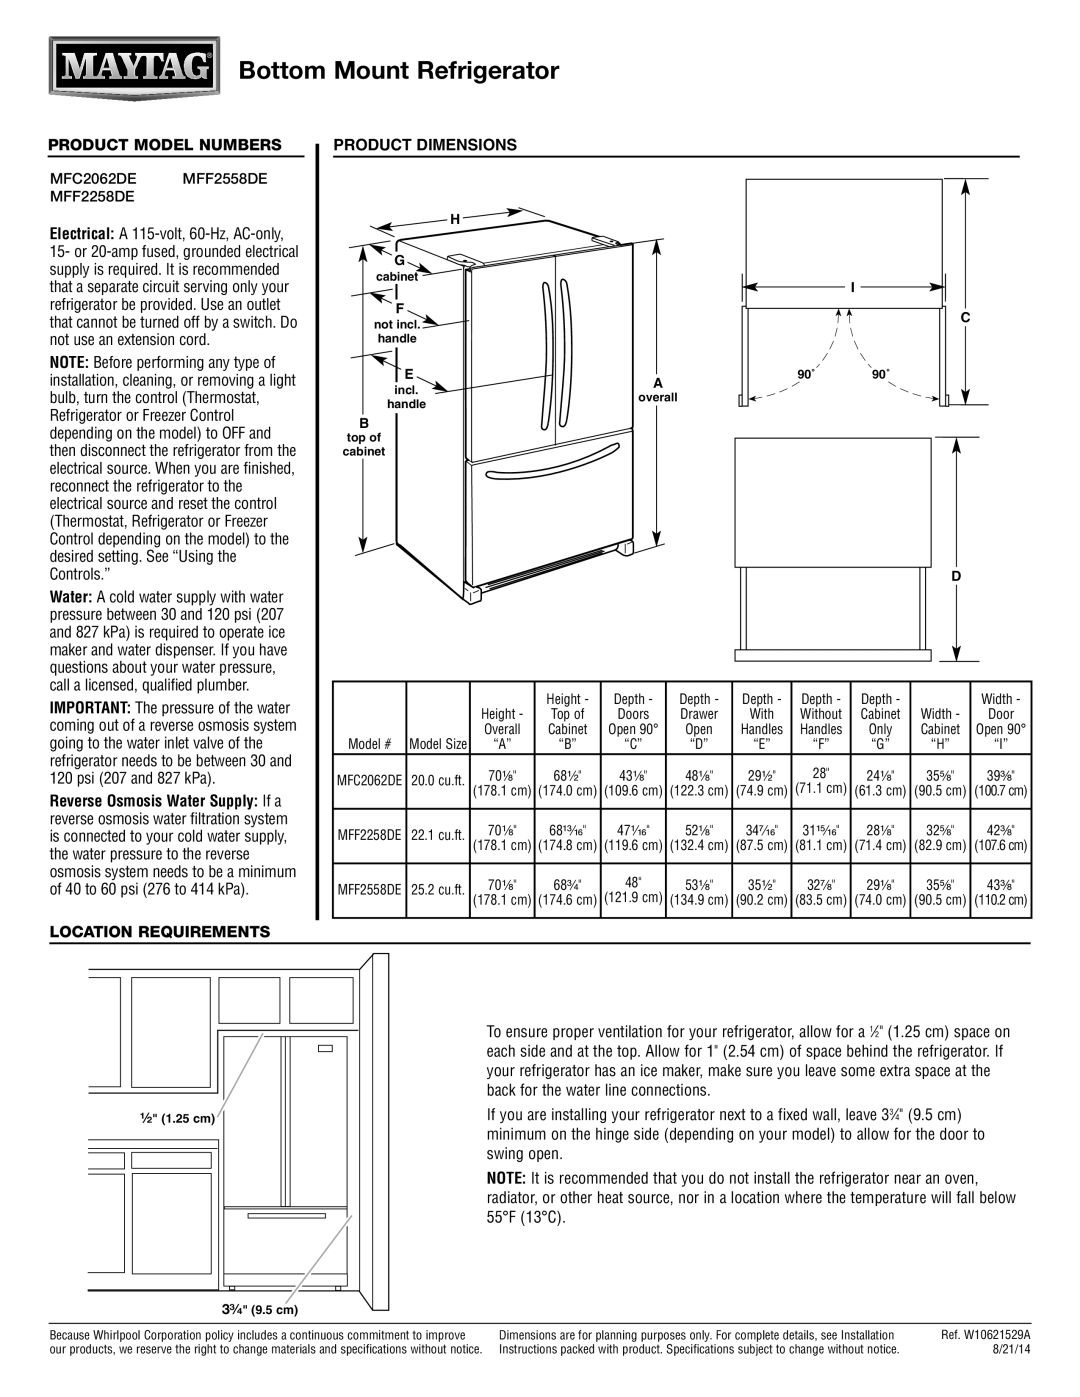 Maytag MFF2258DE dimensions Bottom Mount Refrigerator, Product Model Numbers, Product Dimensions, Location Requirements 